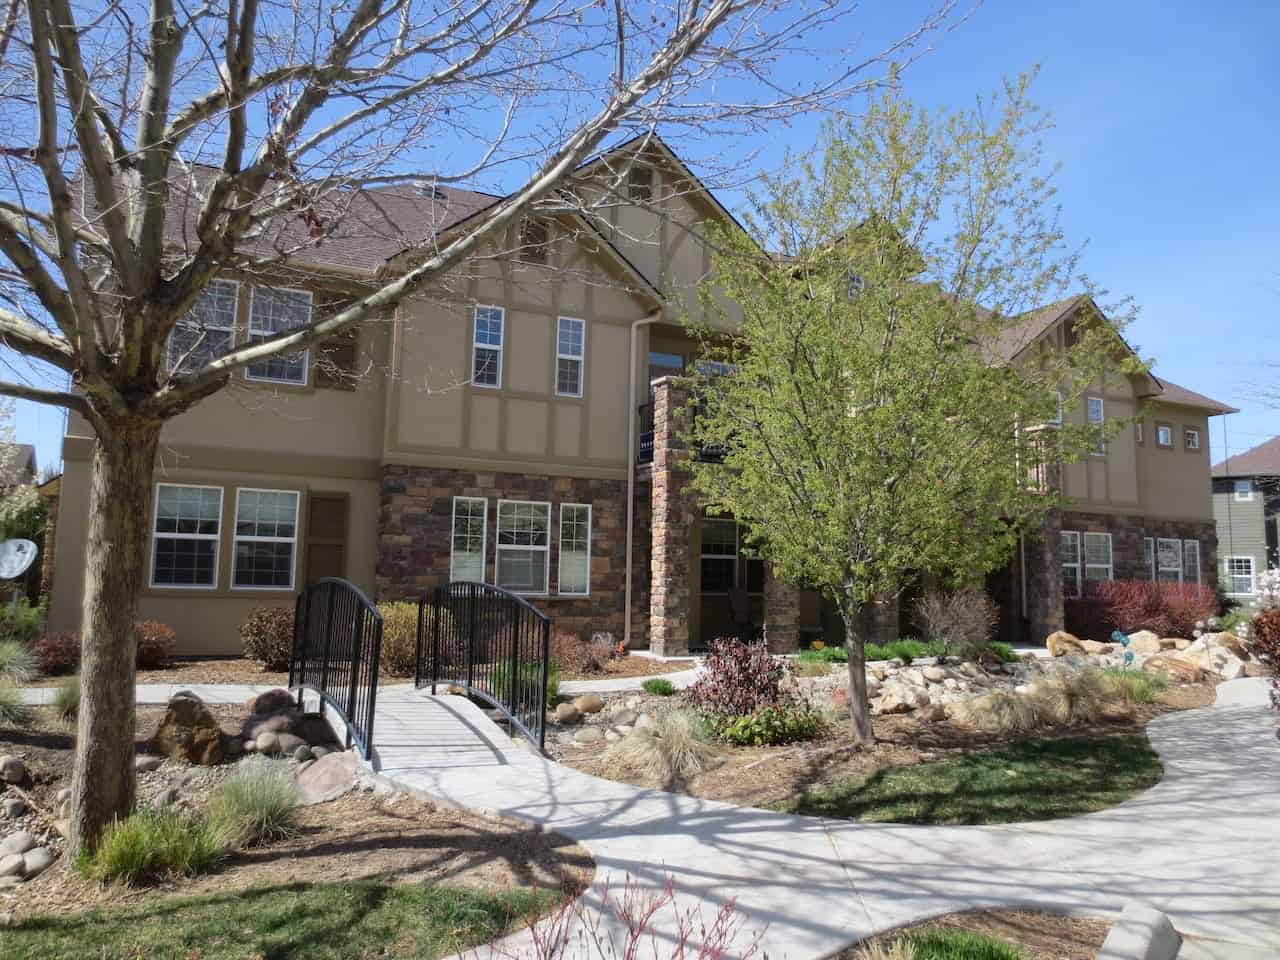 Check out this fantastic budget Airbnb near Boise